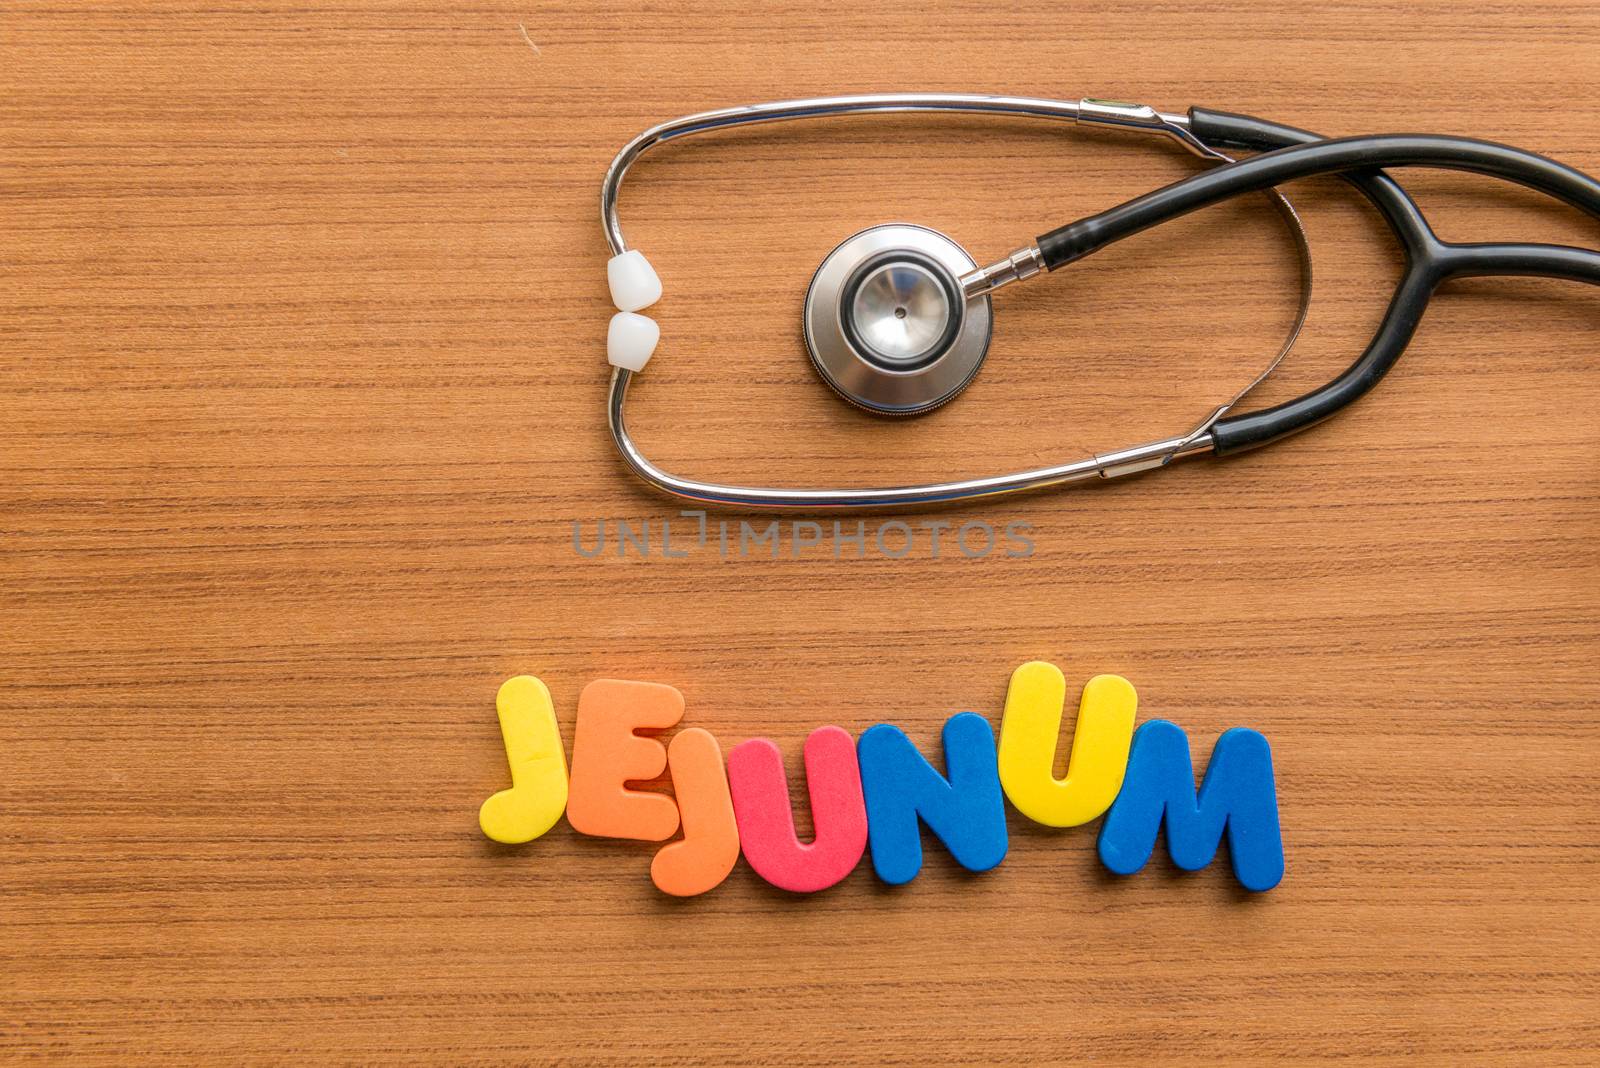 jejunum colorful word with Stethoscope on wooden background